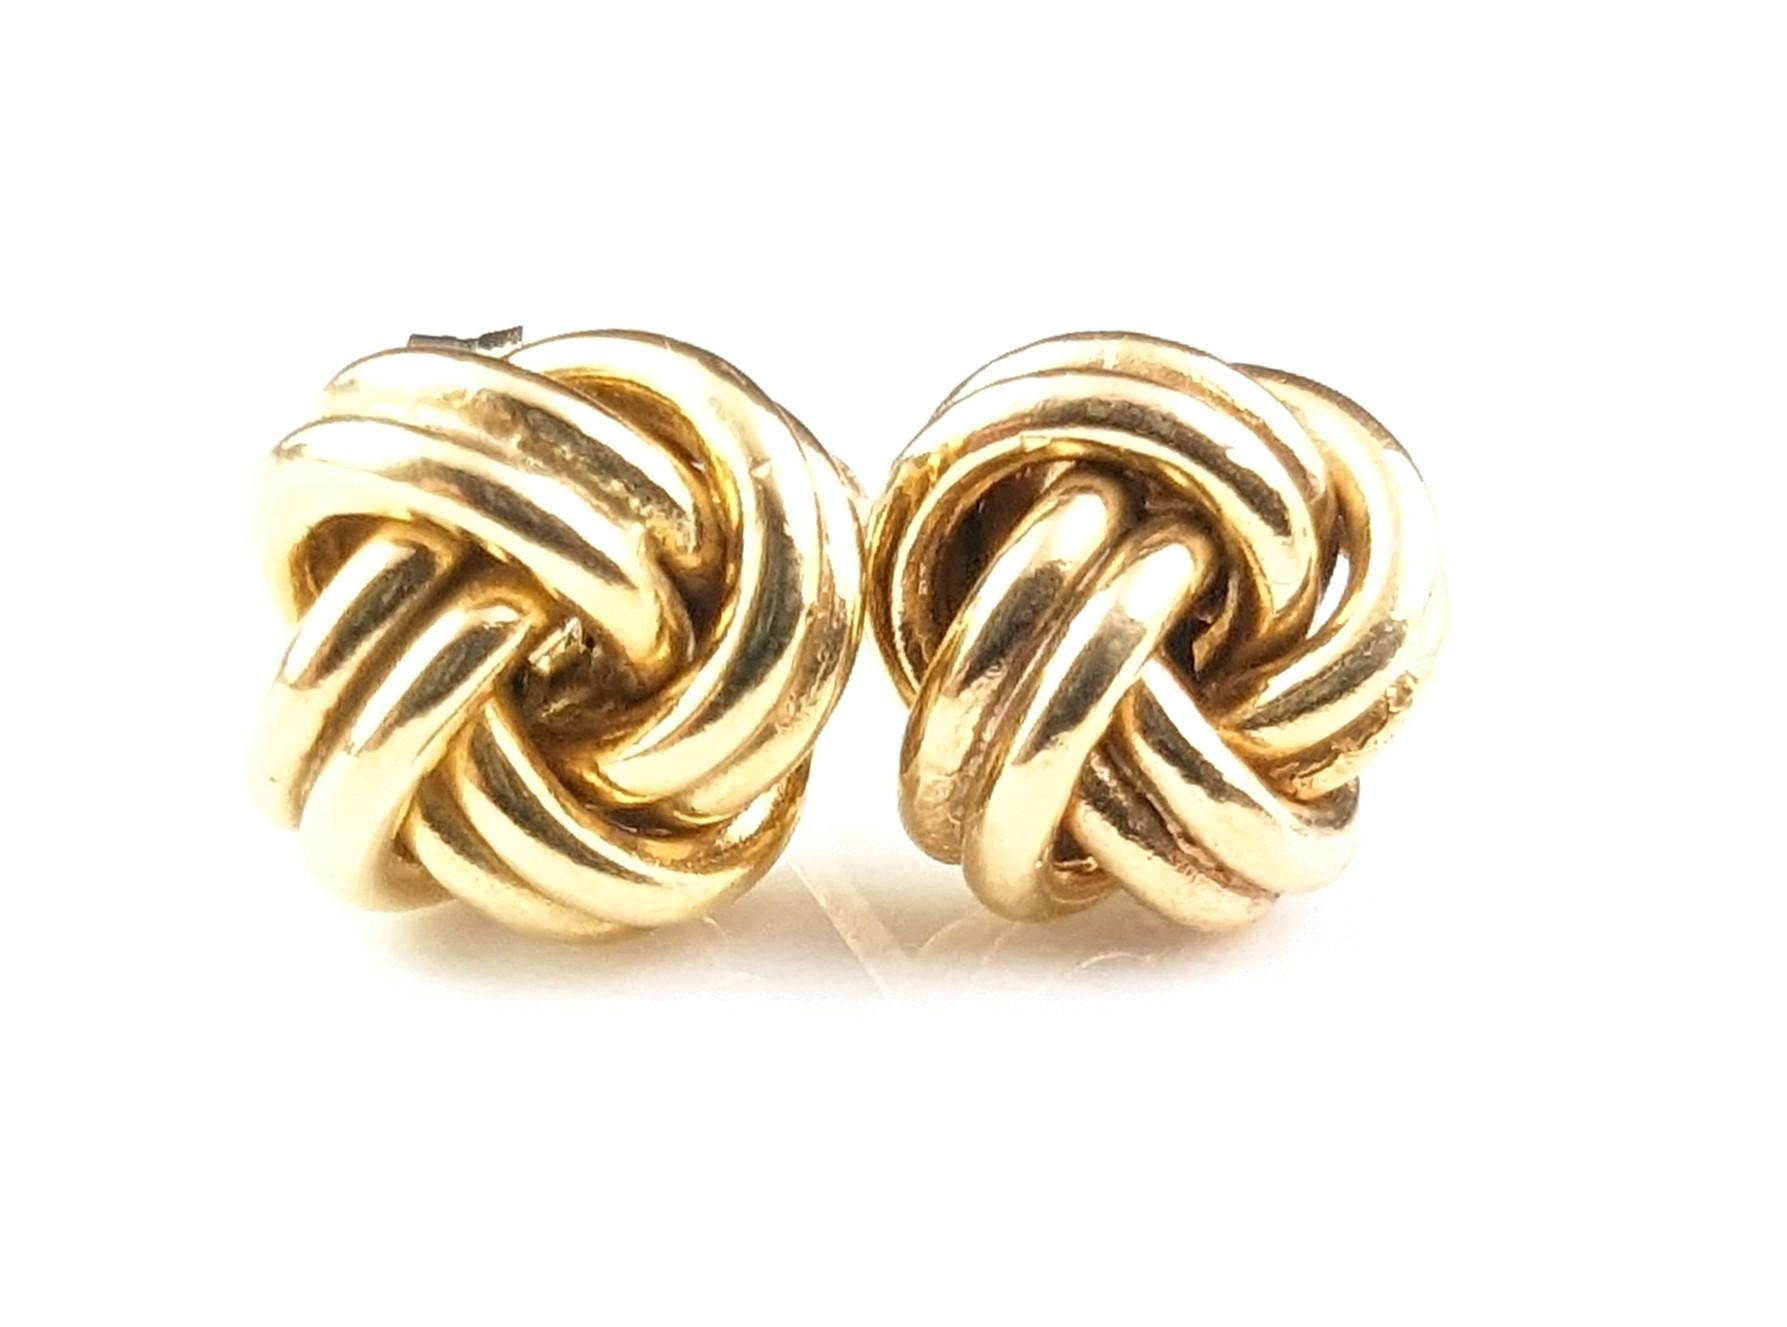 Vintage 9k yellow gold knot earrings, studs  4